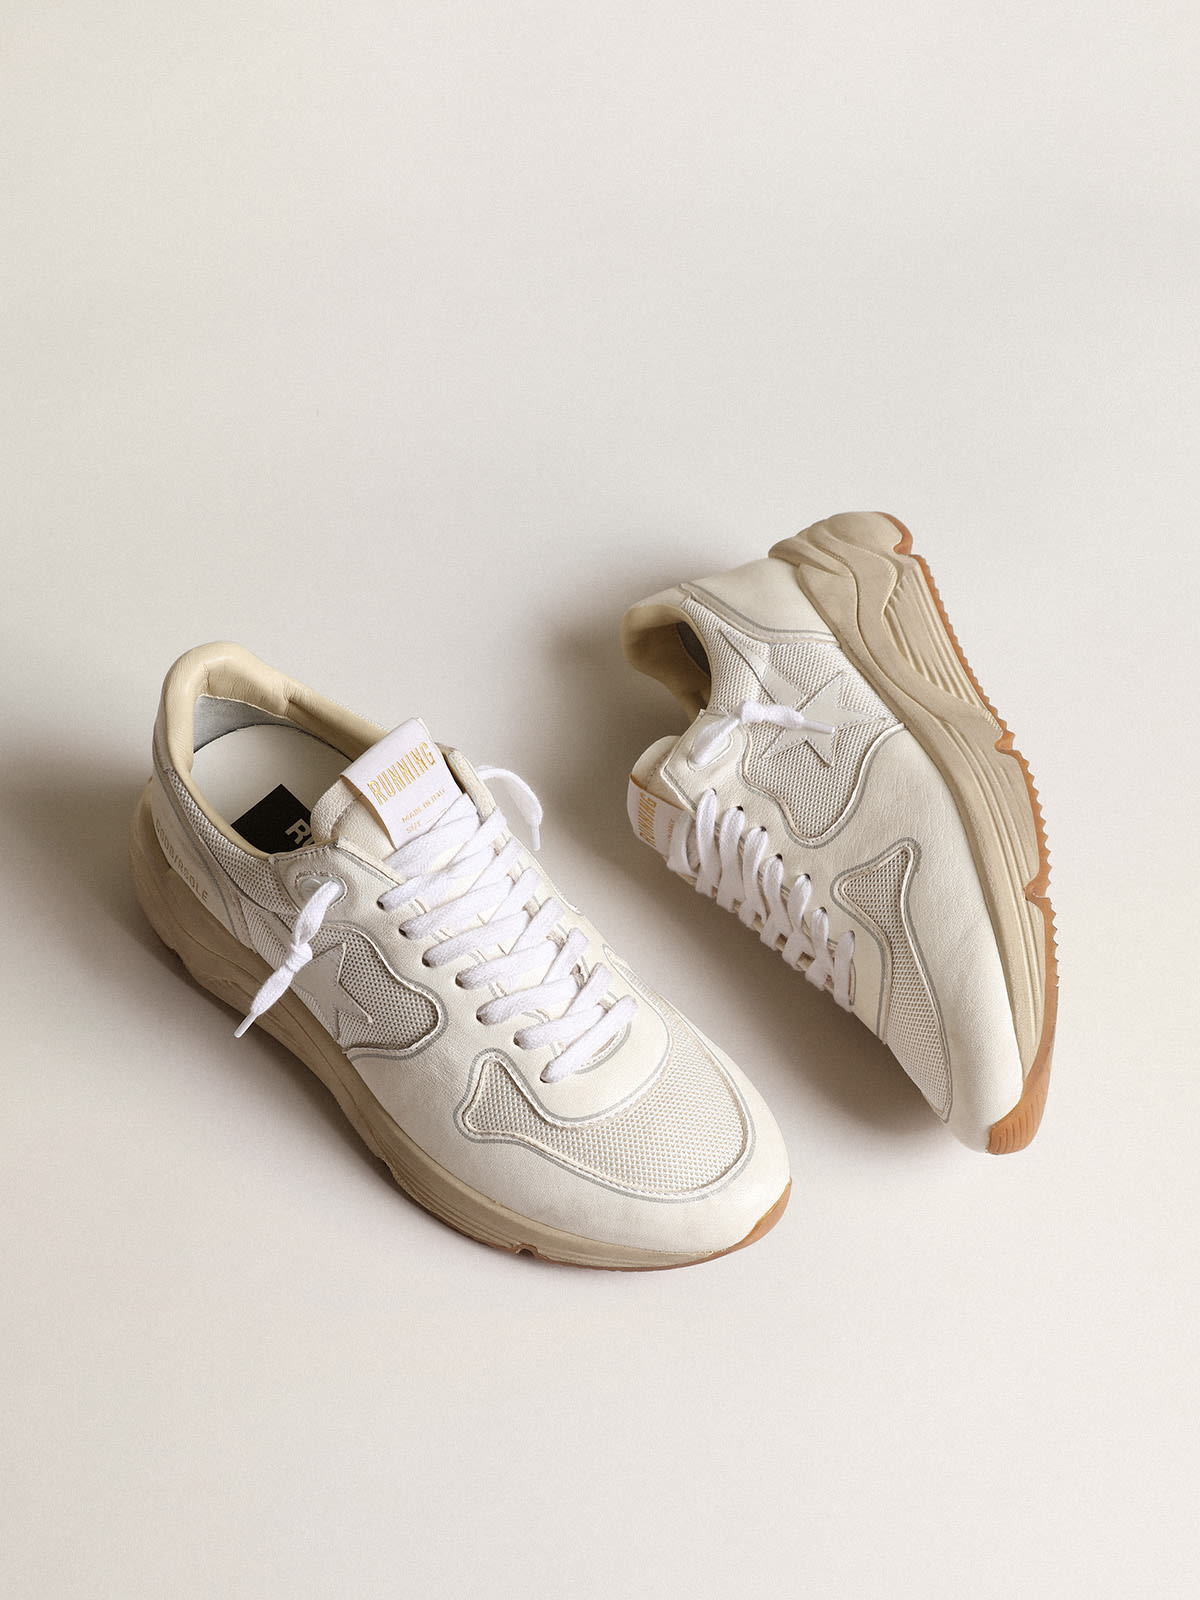 Women’s Running sole sneakers in optical-white mesh and nappa leather with  white leather star